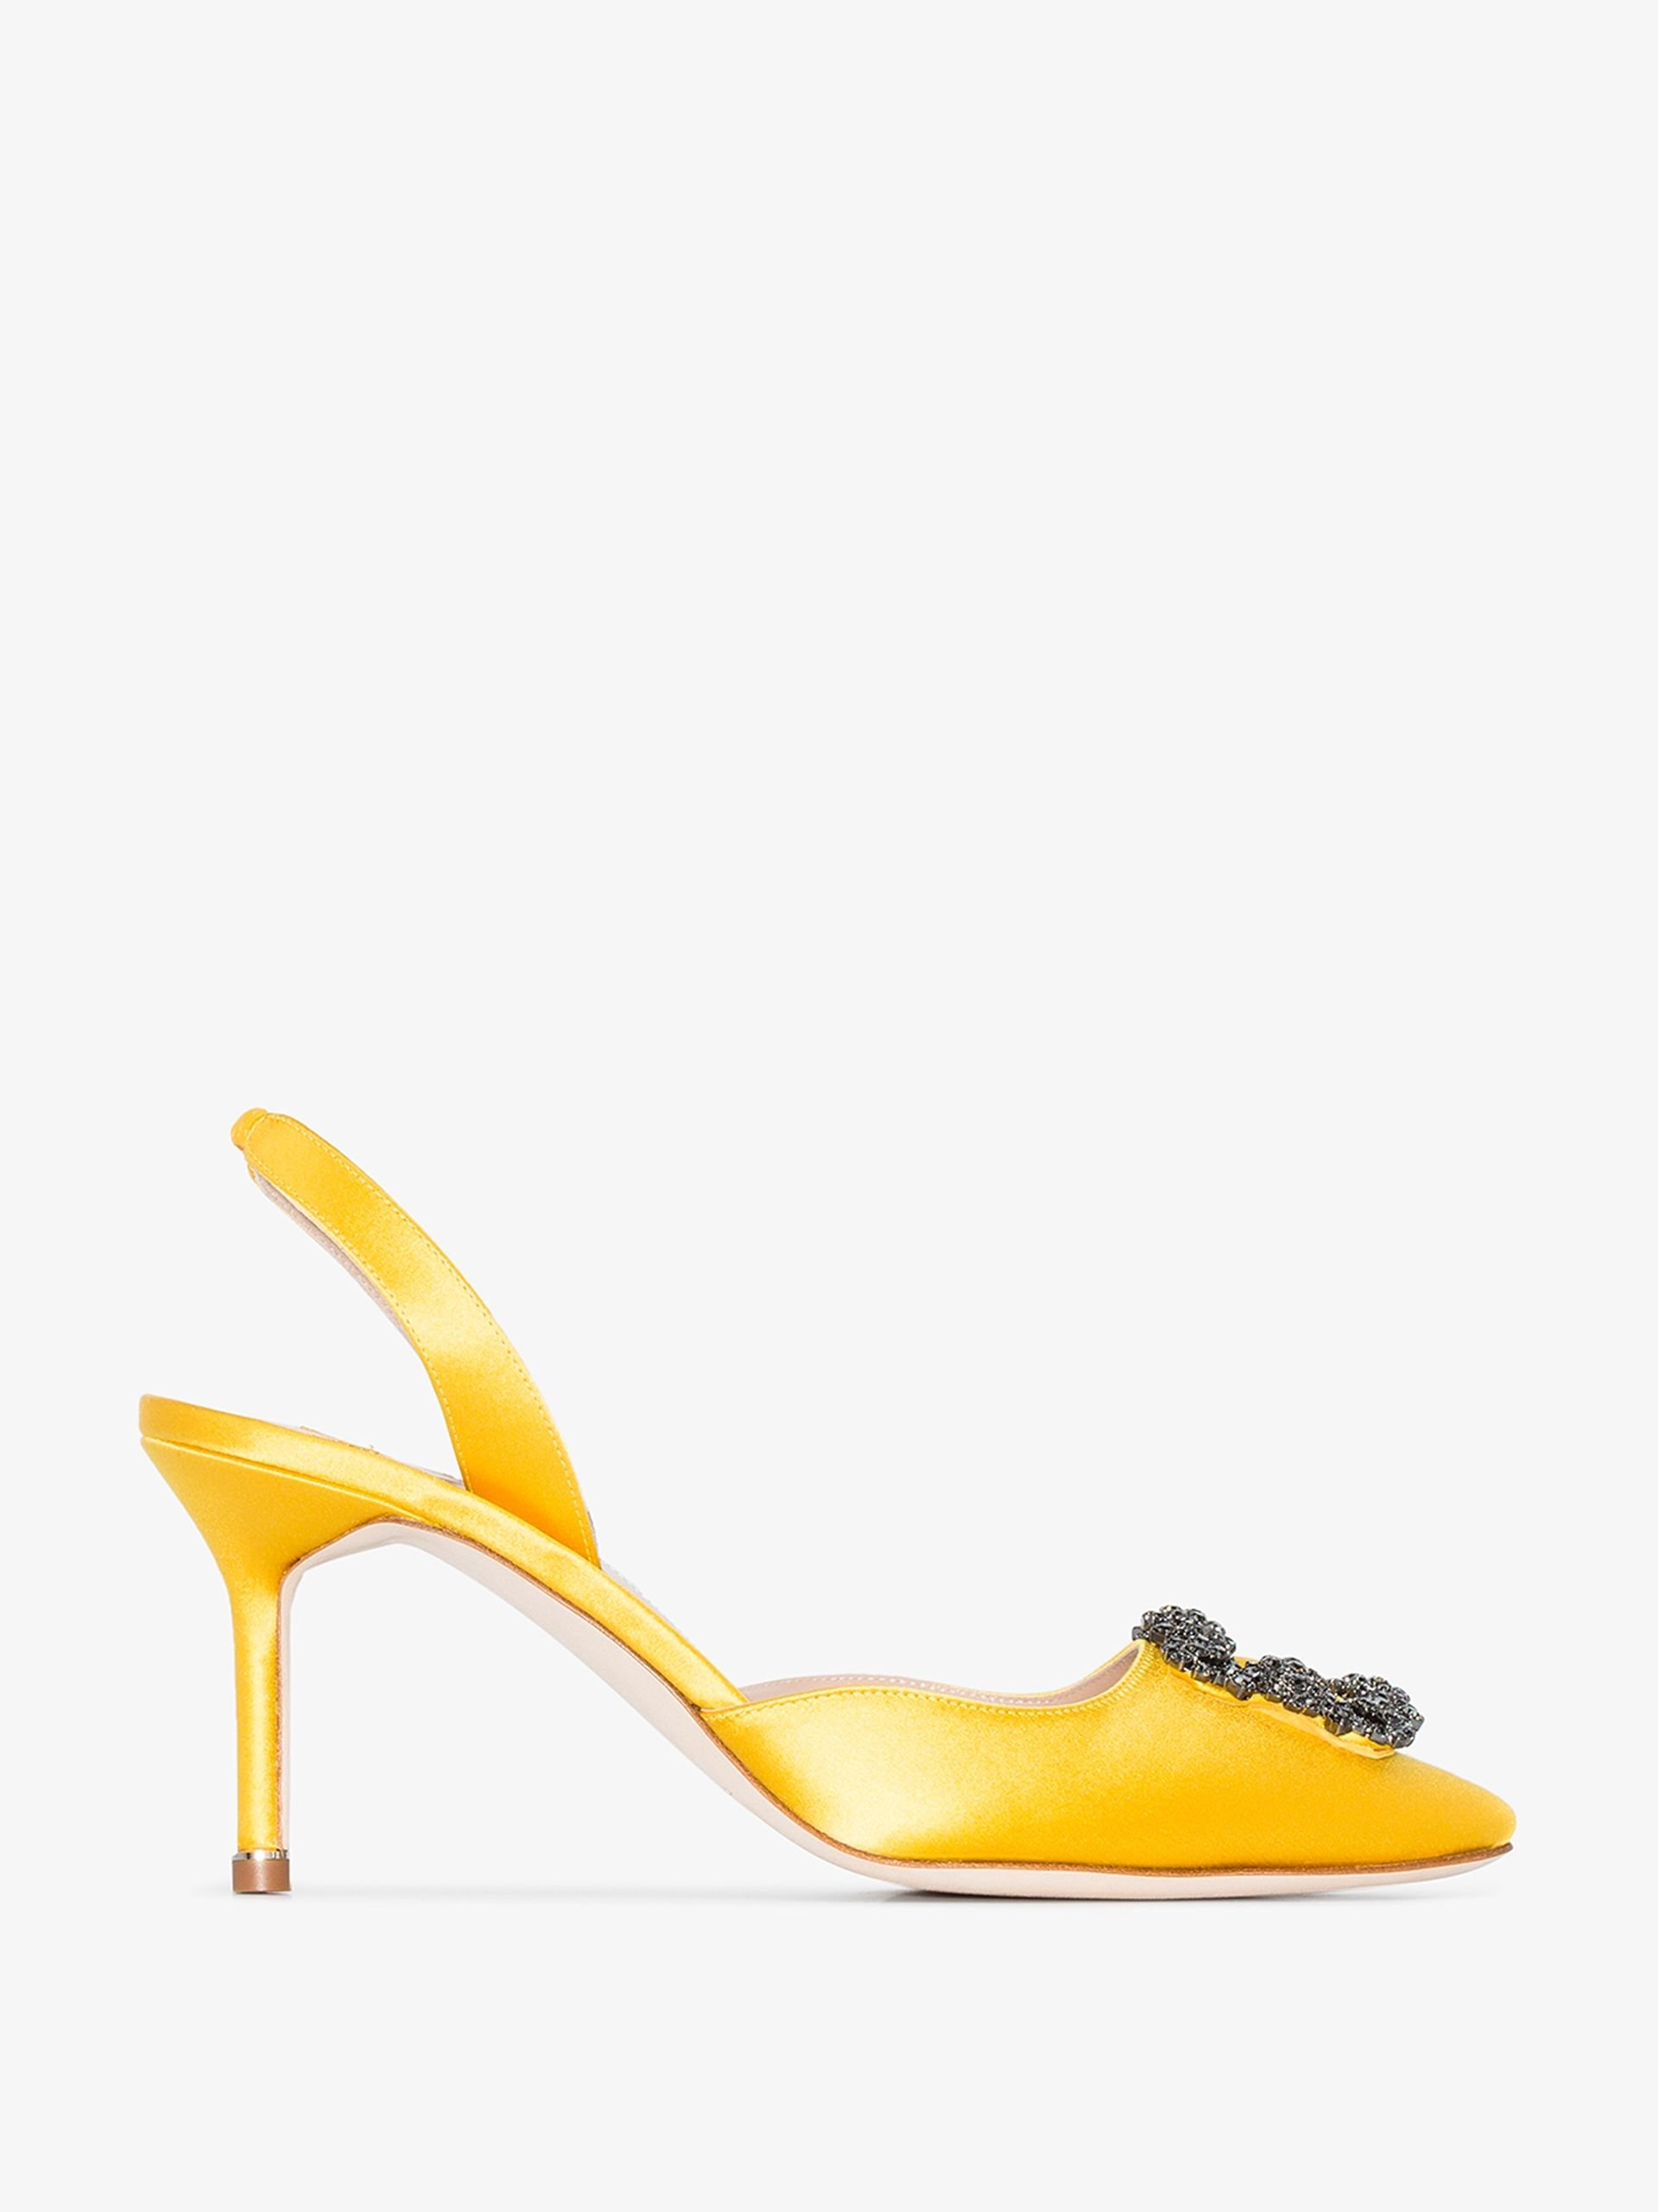 Lanvin 70mm patent leather pumps - Yellow